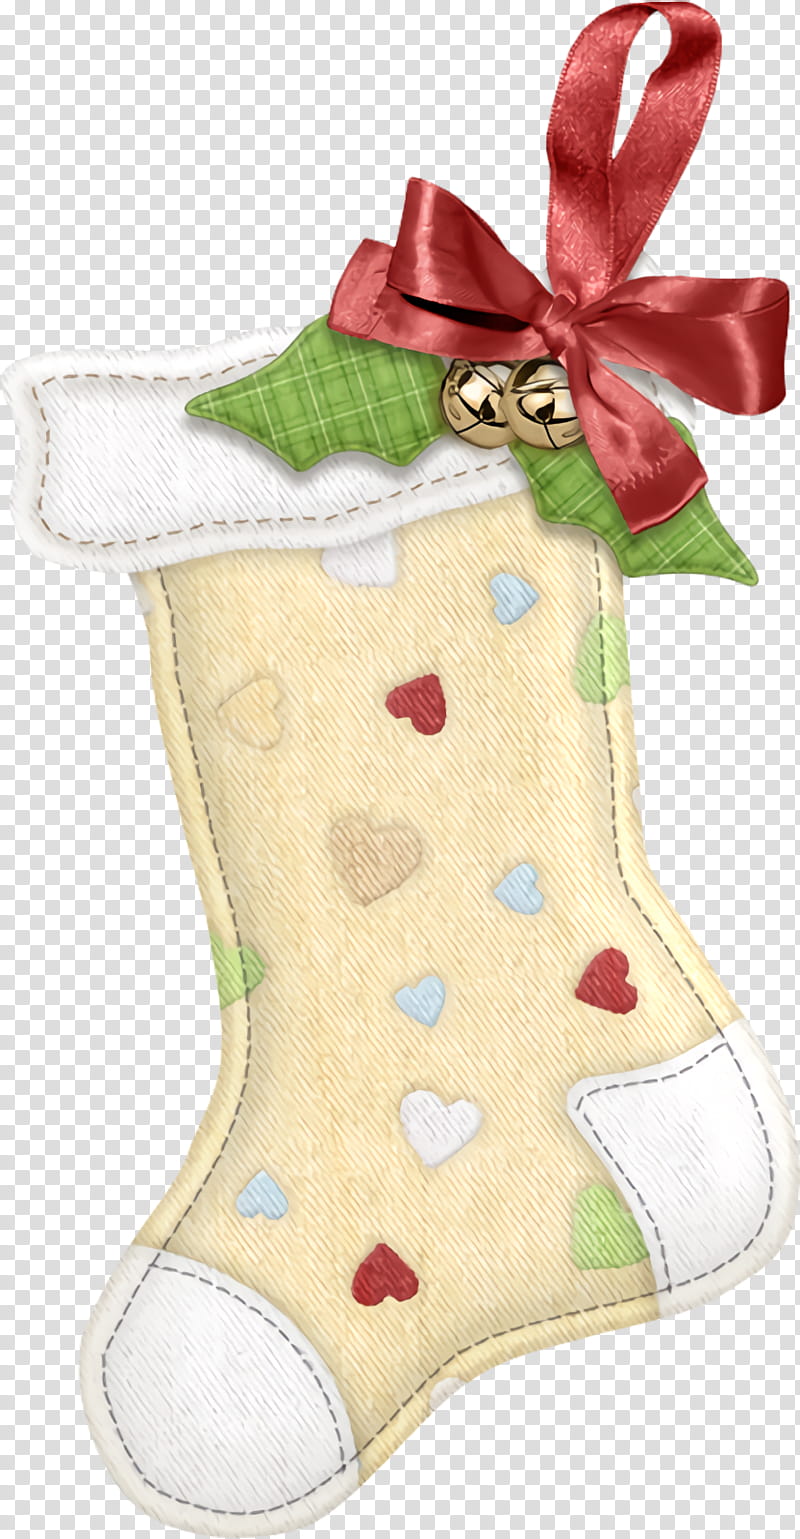 Christmas ing Christmas Socks, Christmas ing, Christmas Decoration, Baby Toddler Clothing, Interior Design transparent background PNG clipart